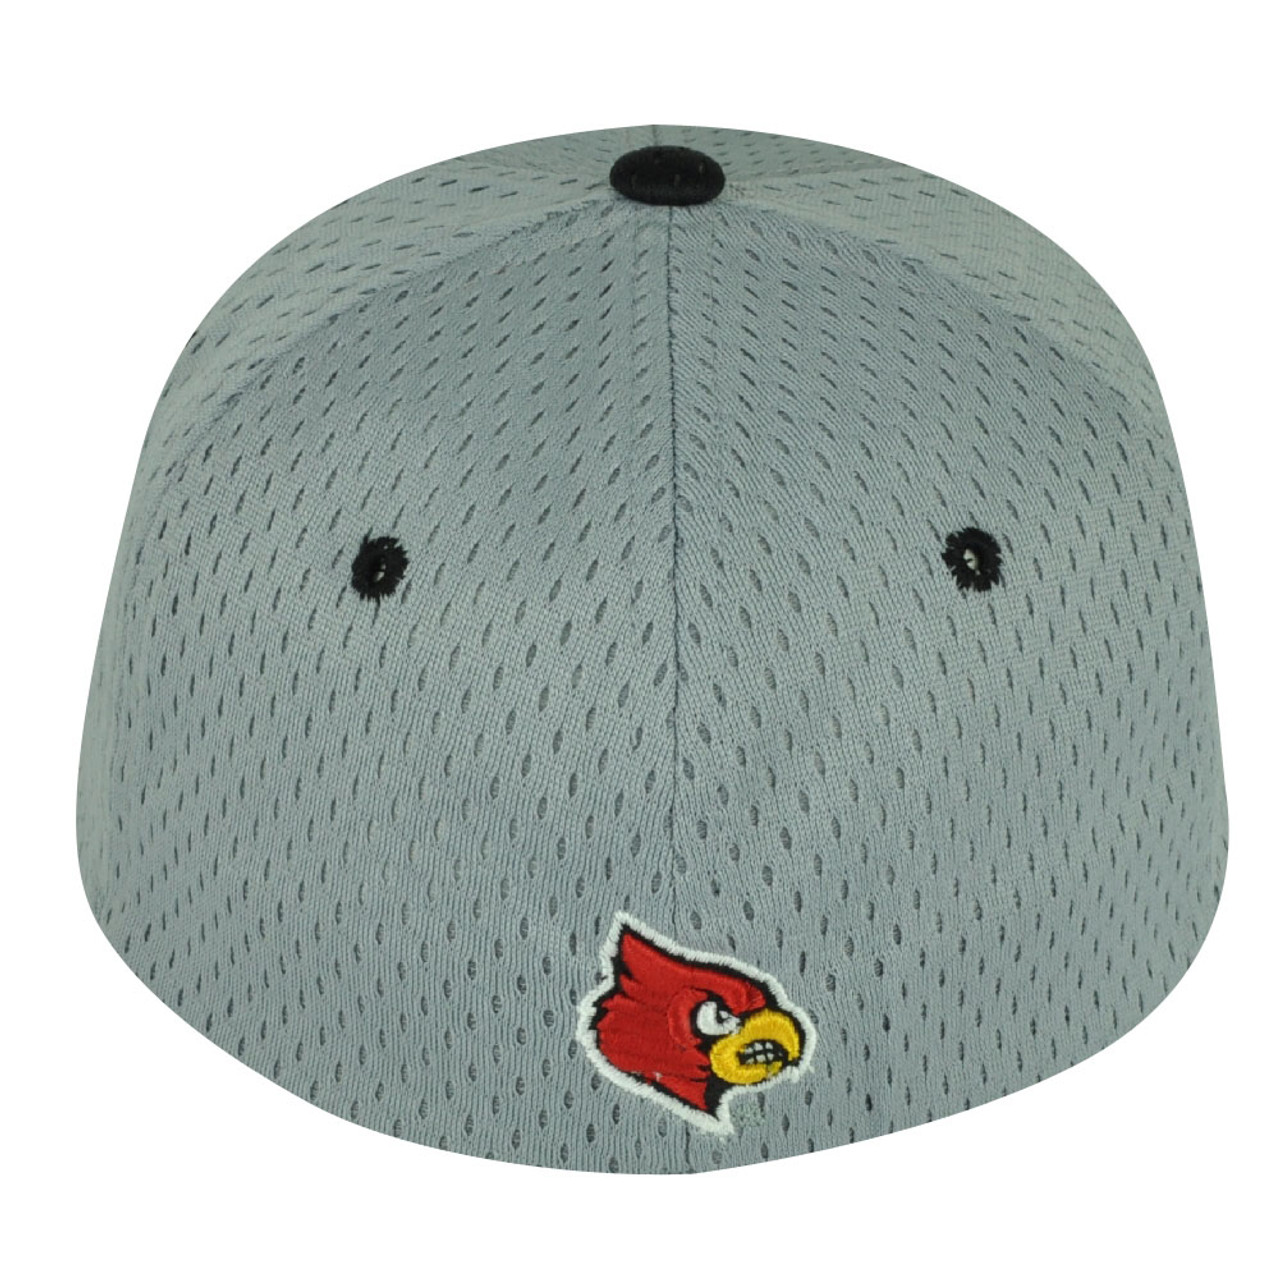 NCAA Zephyr Louisville Cardinals Adult Curved Bill Fitted Size Hat Cap  Black - Cap Store Online.com